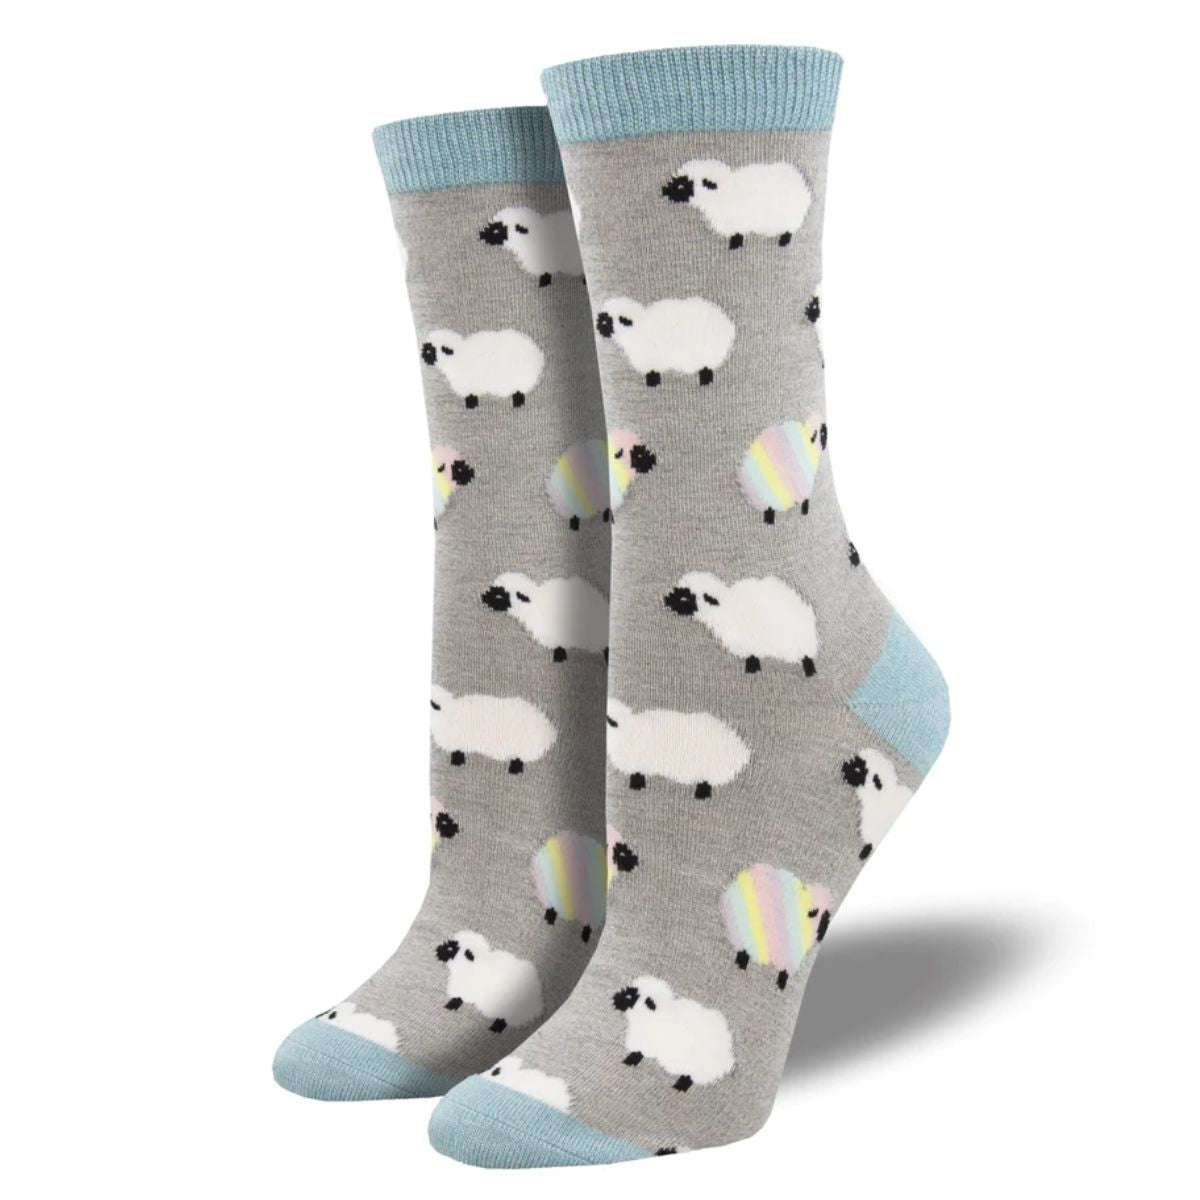 Ewenique socks a pair of grey crew socks with sheep print